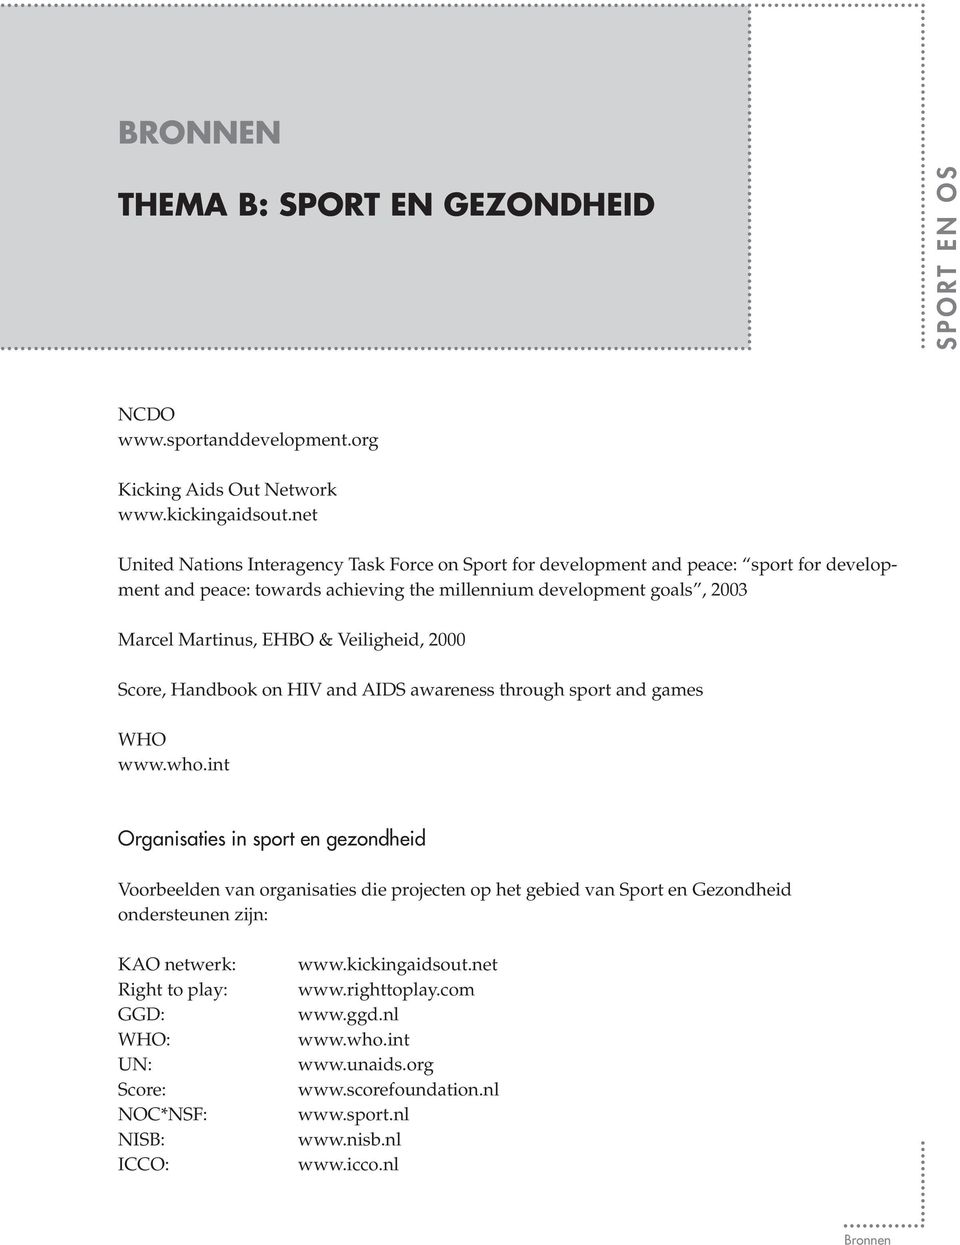 EHBO & Veiligheid, 2000 Score, Handbook on HIV and AIDS awareness through sport and games WHO www.who.